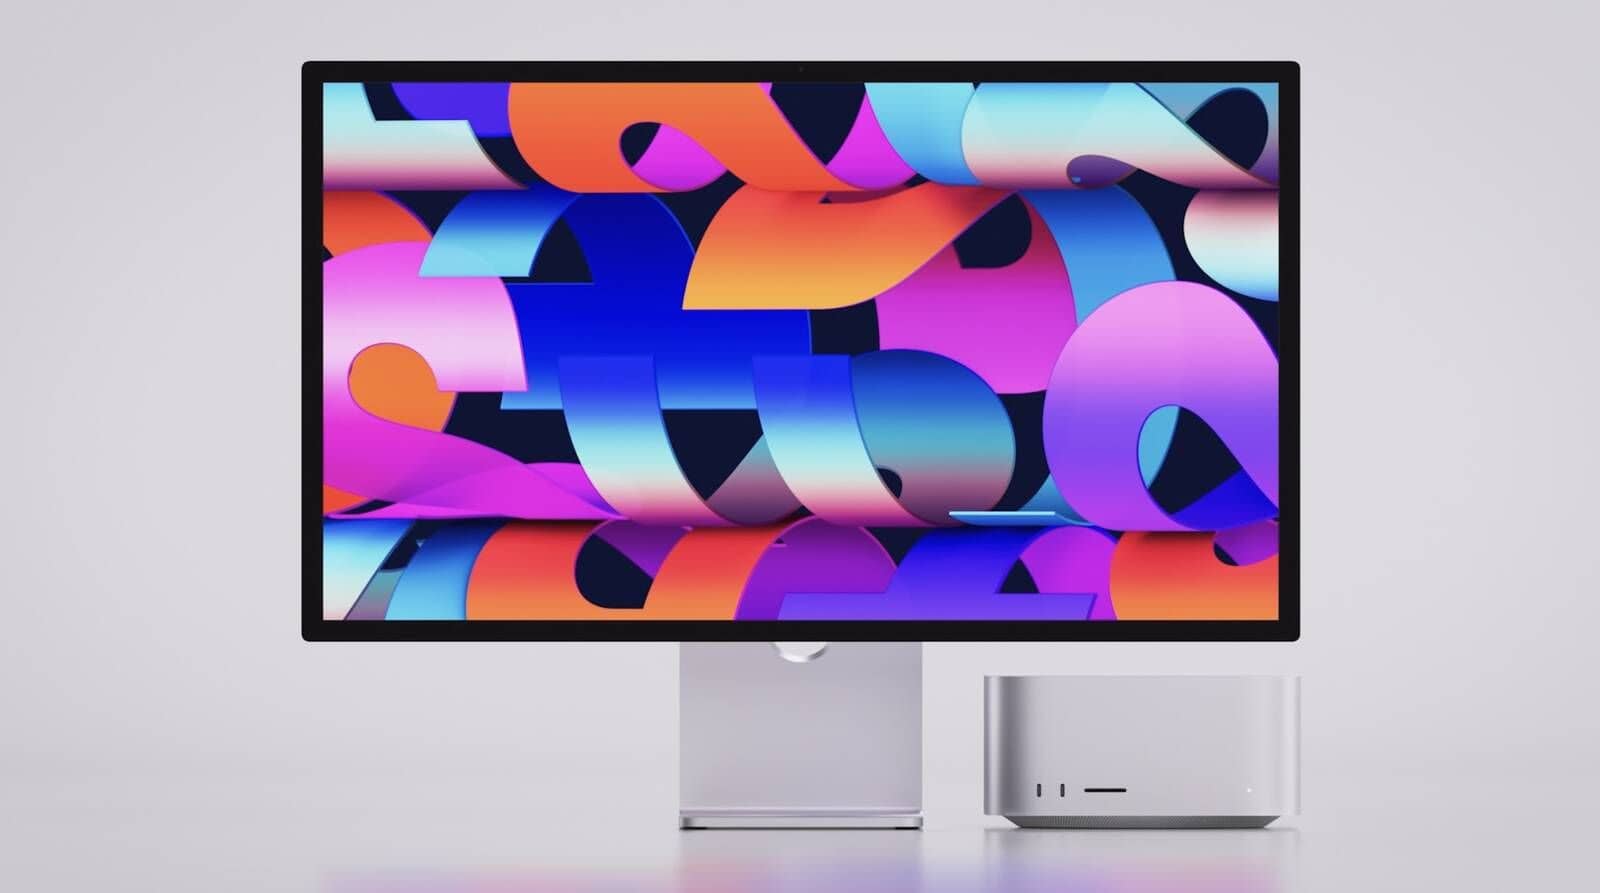 Mac Studio computer and Studio display, recently revealed by Apple at their 2022 